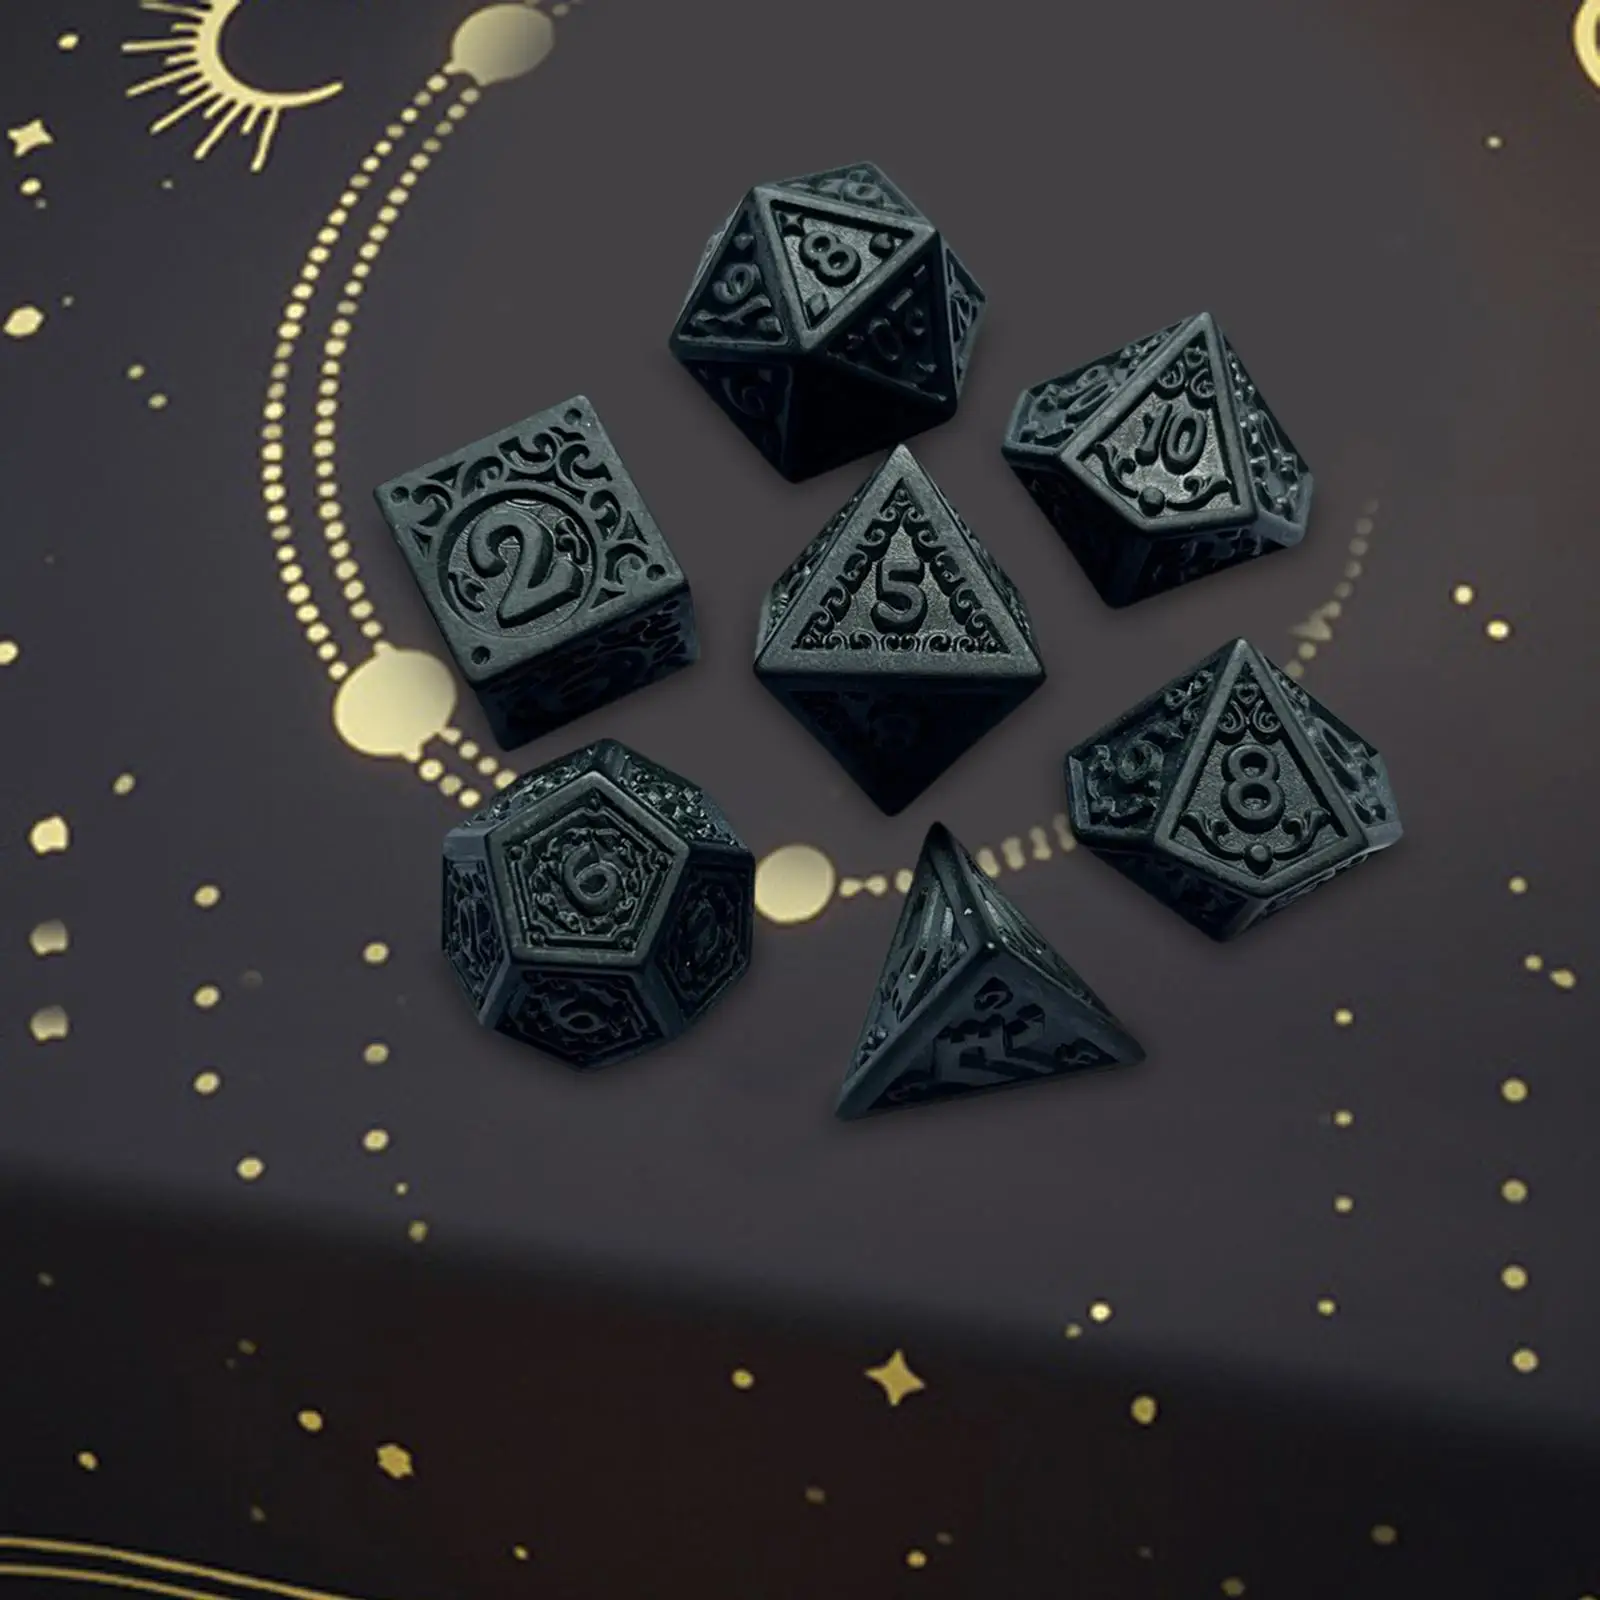 7x Polyhedral Dice Vintage Style Parties Accessories Black Acrylic Entertainment Toy Gift Multisided Dice for Role Playing Game